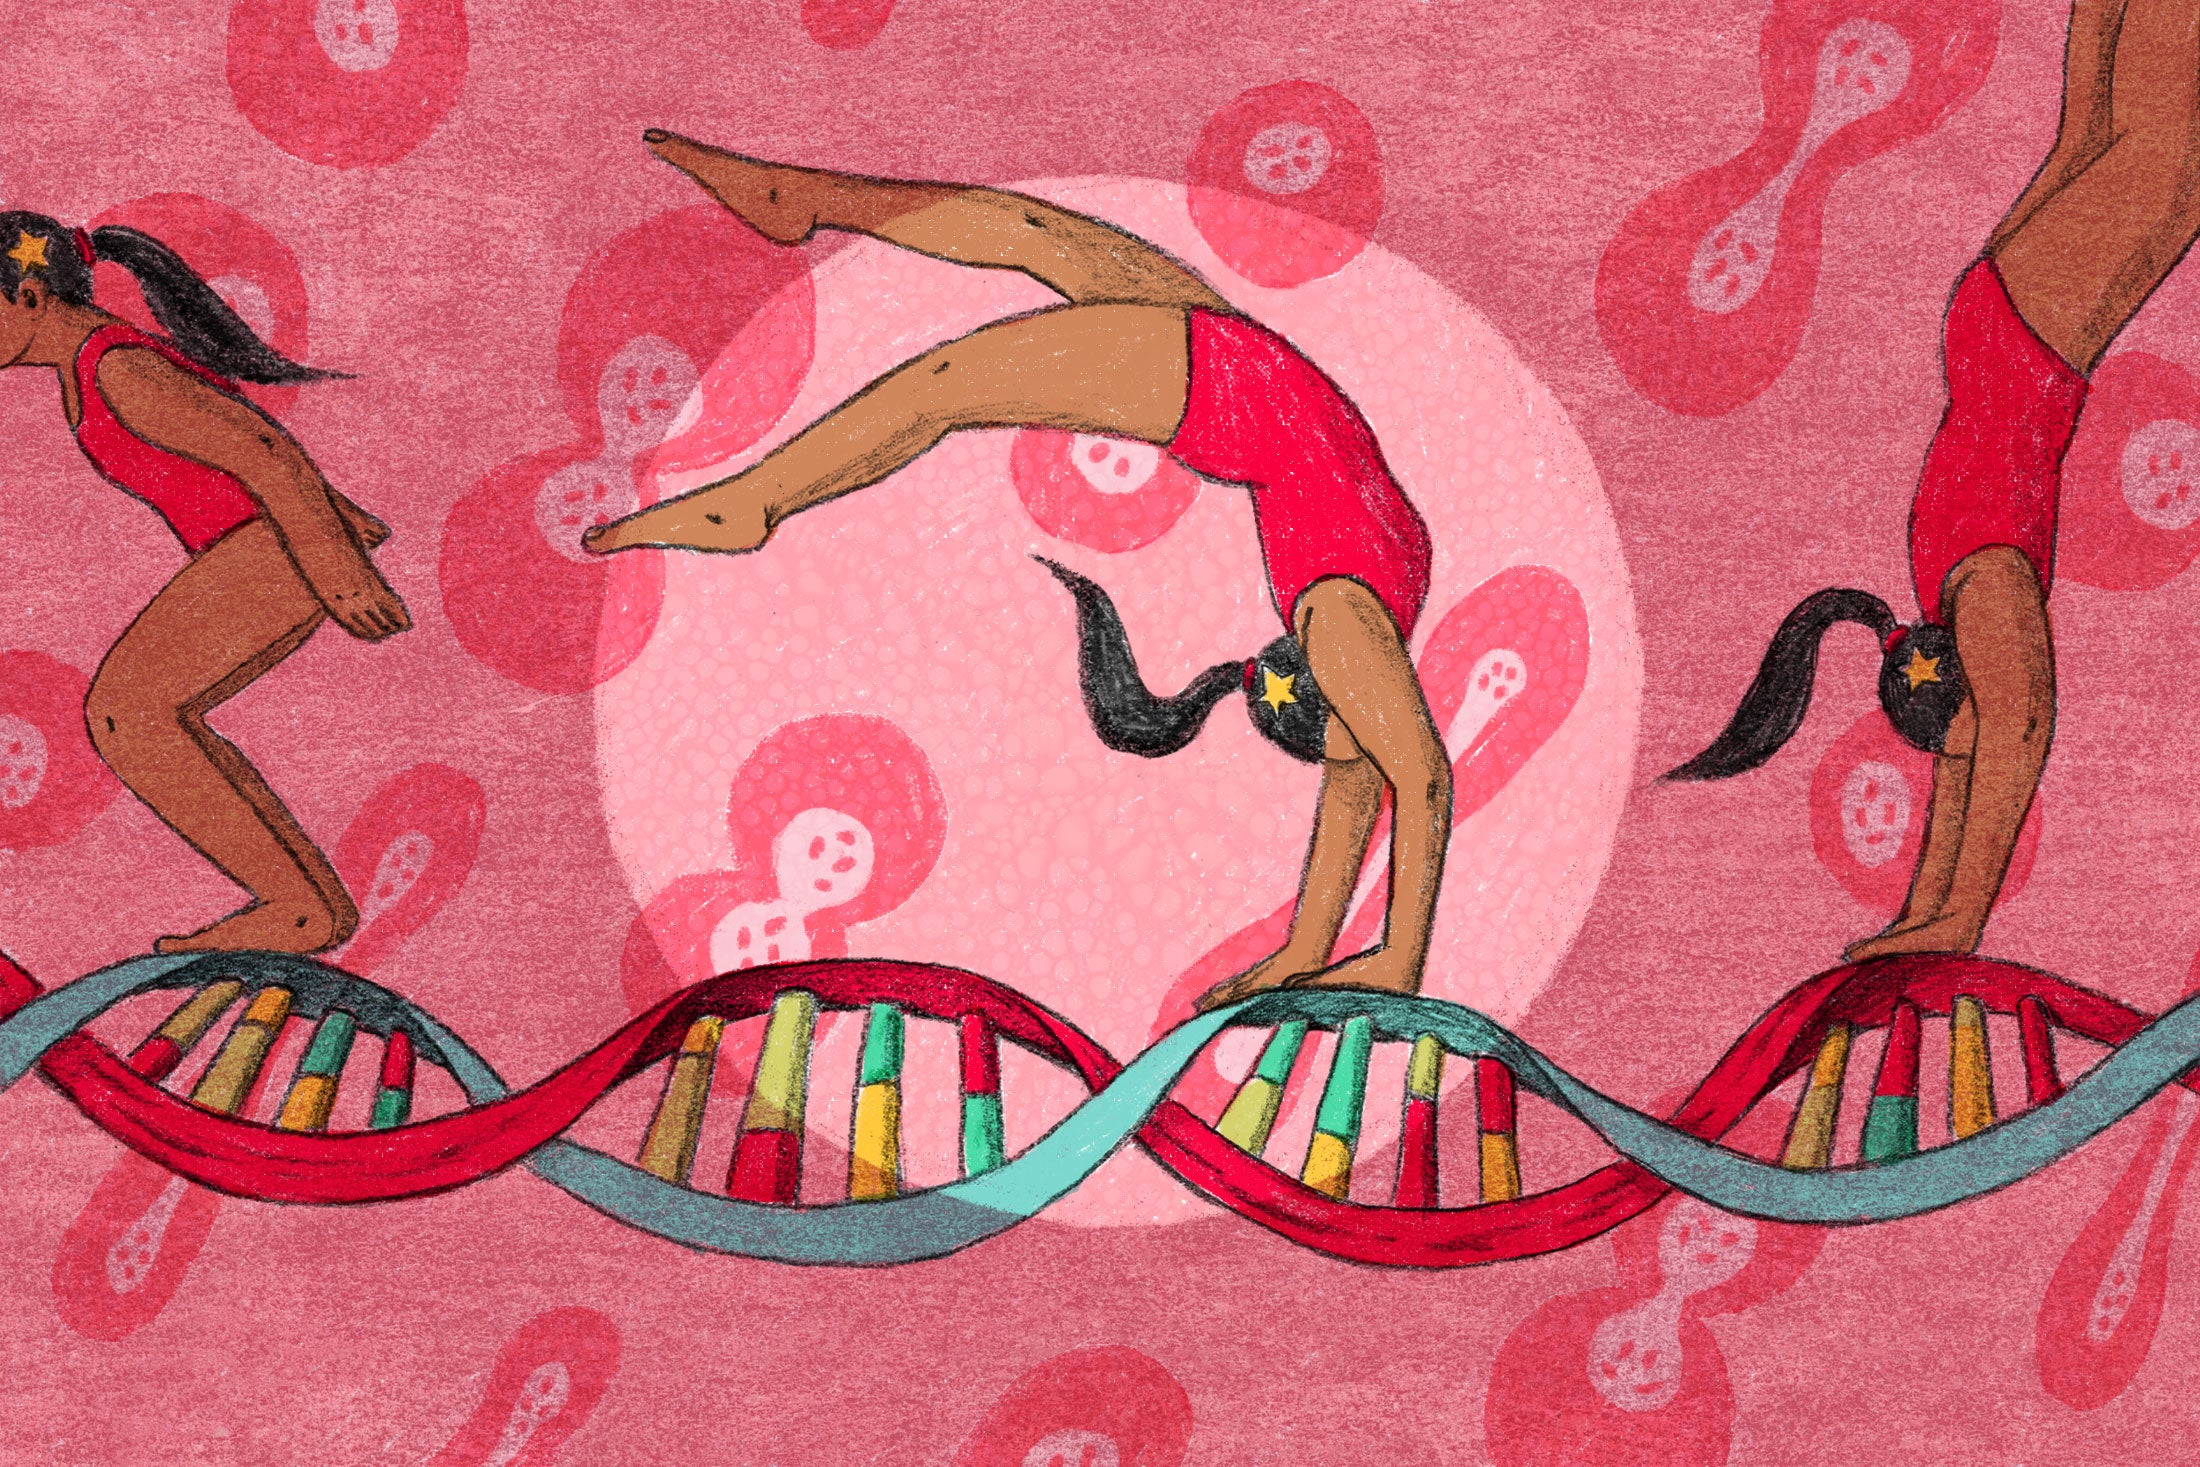 A gymnast doing a routine on a strand of DNA.